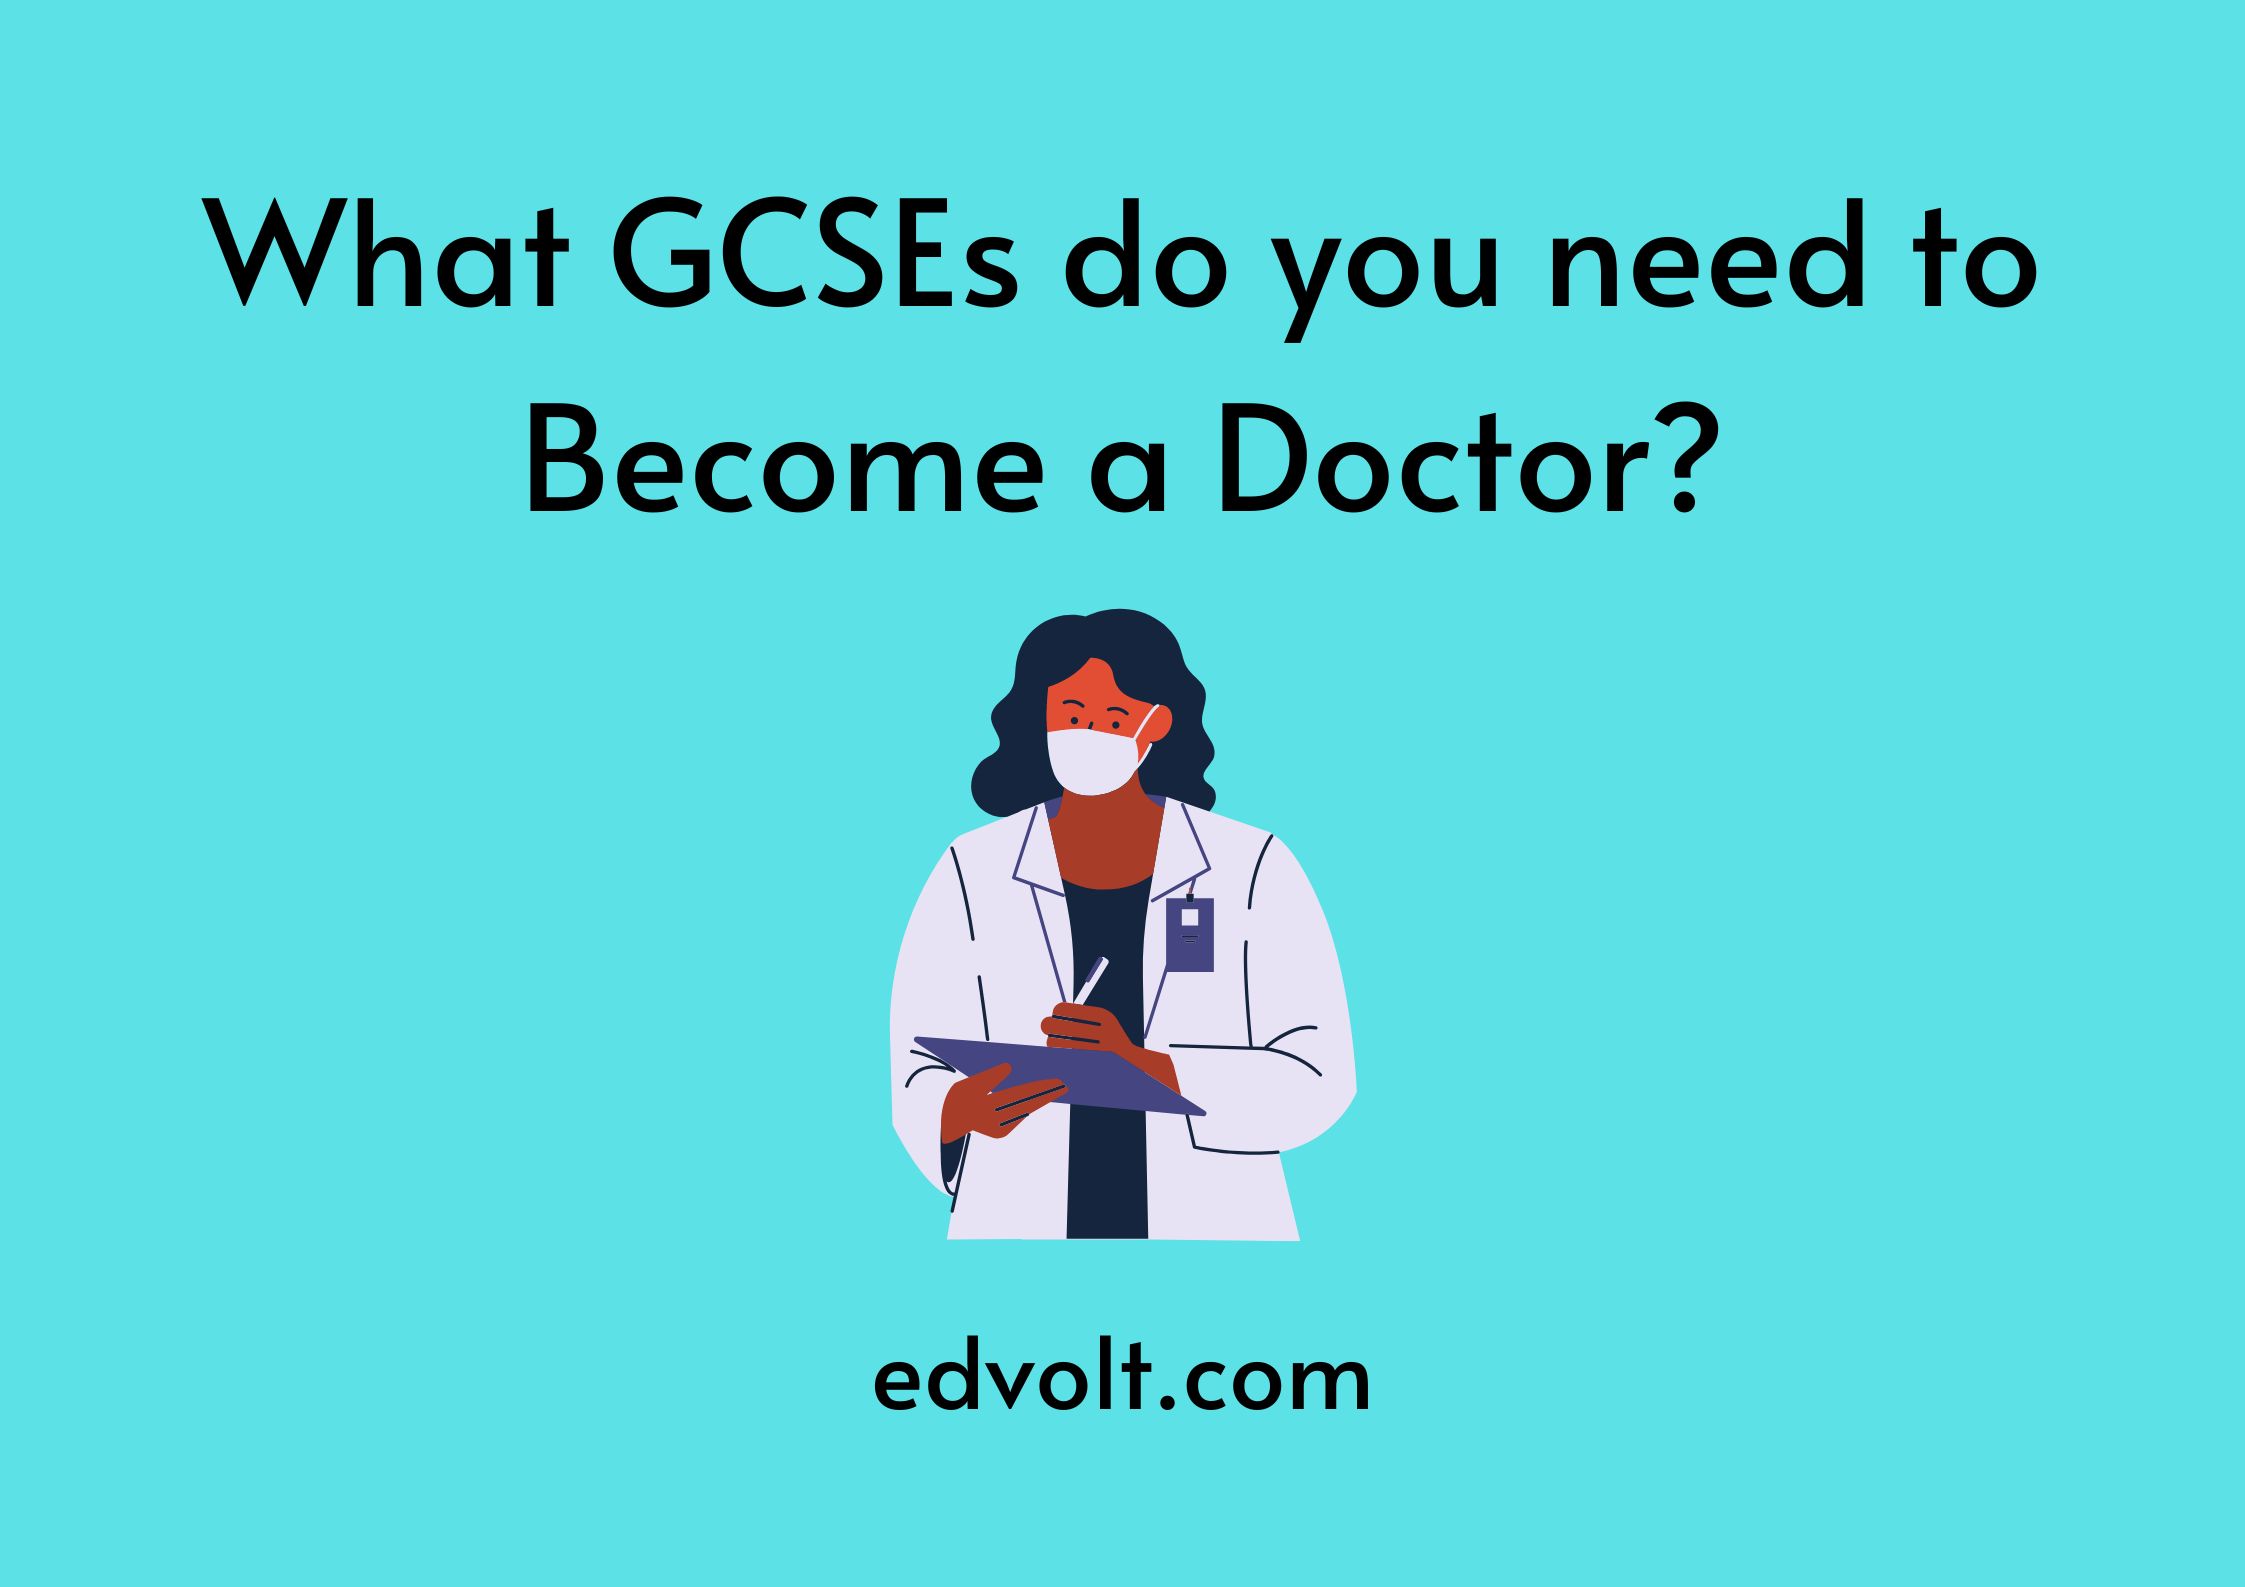 What GCSEs do you need to Become a Doctor?